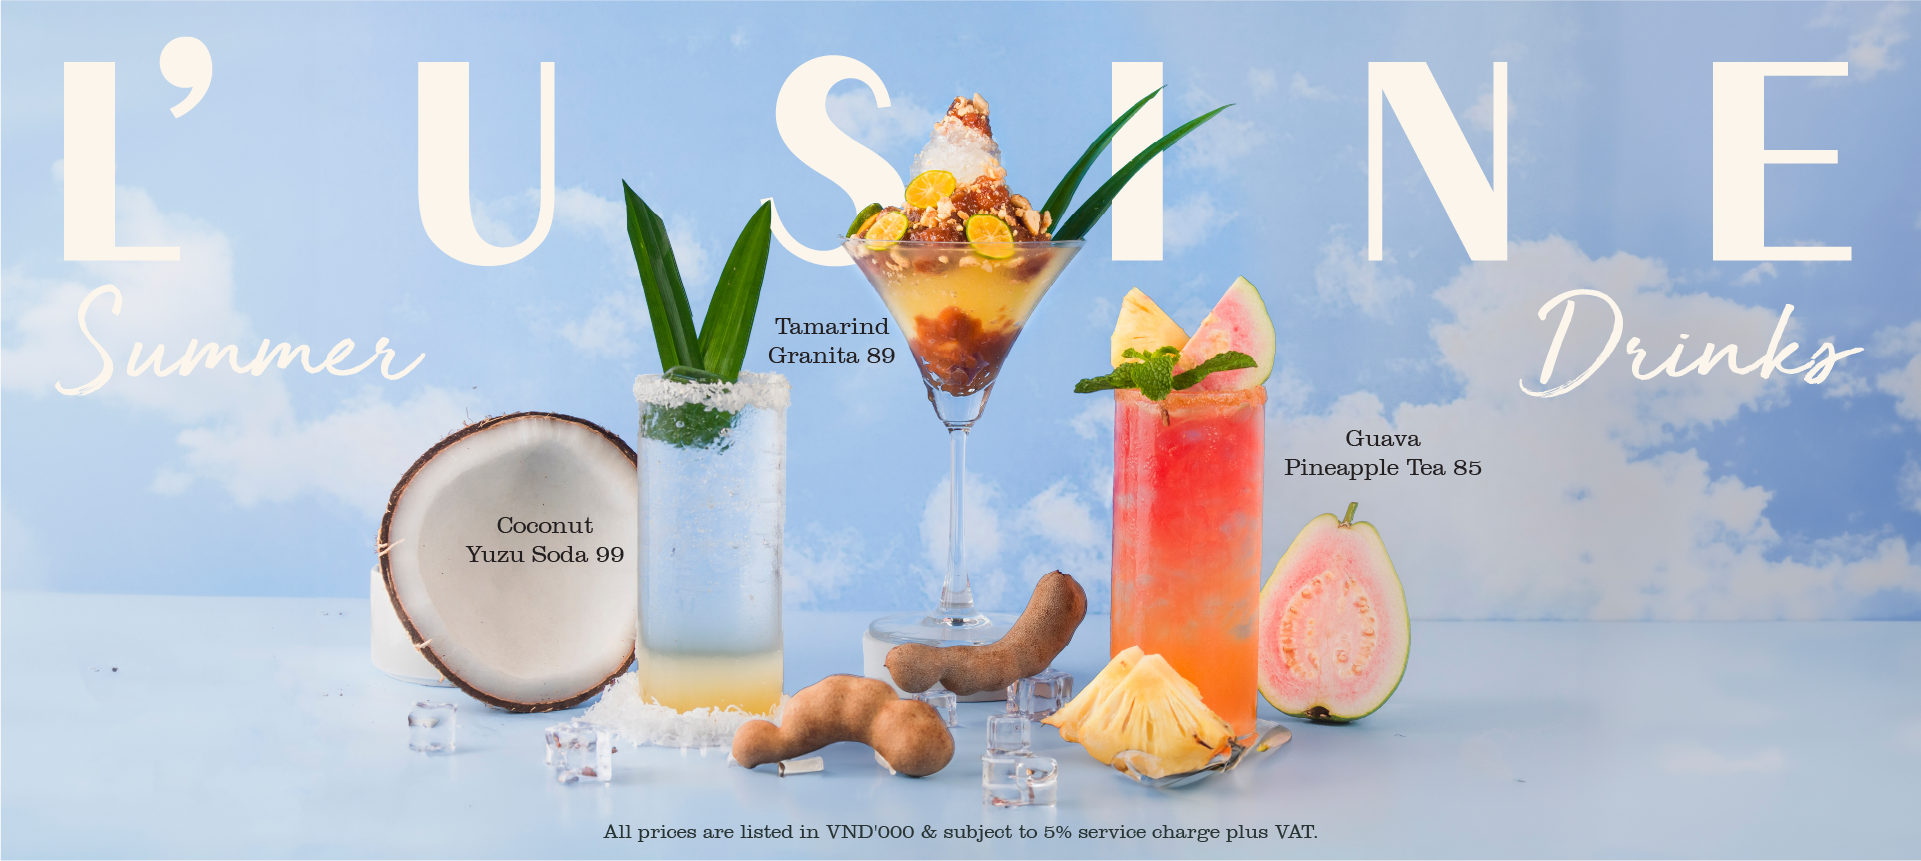 L'USINE - SUMMER DREAMS DRINK COLLECTION